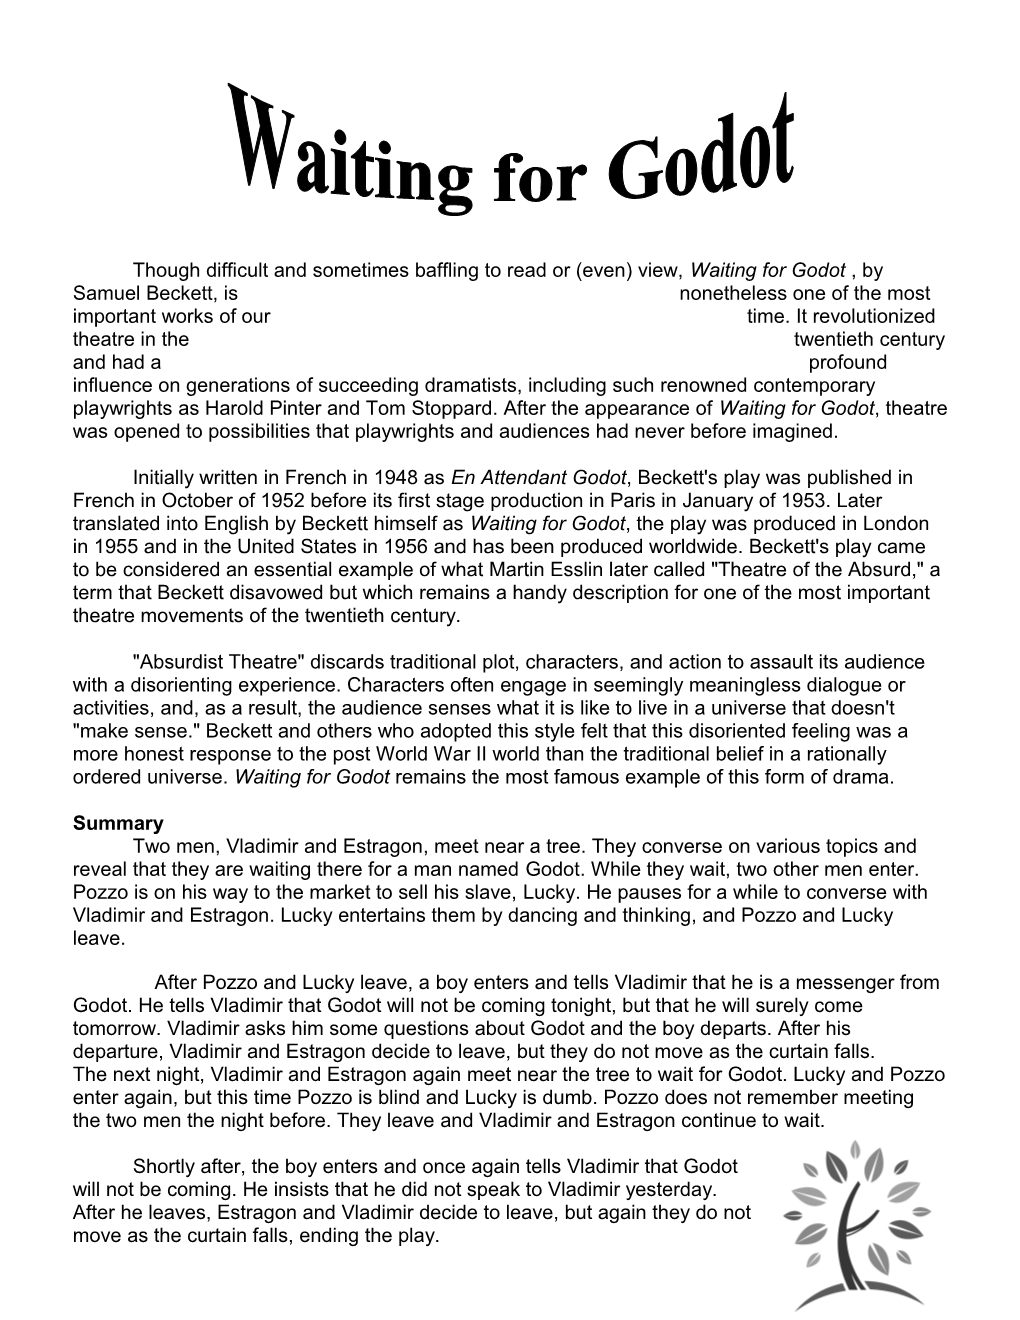 Though Difficult and Sometimes Baffling to Read Or (Even) View, Waiting for Godot, by Samuel